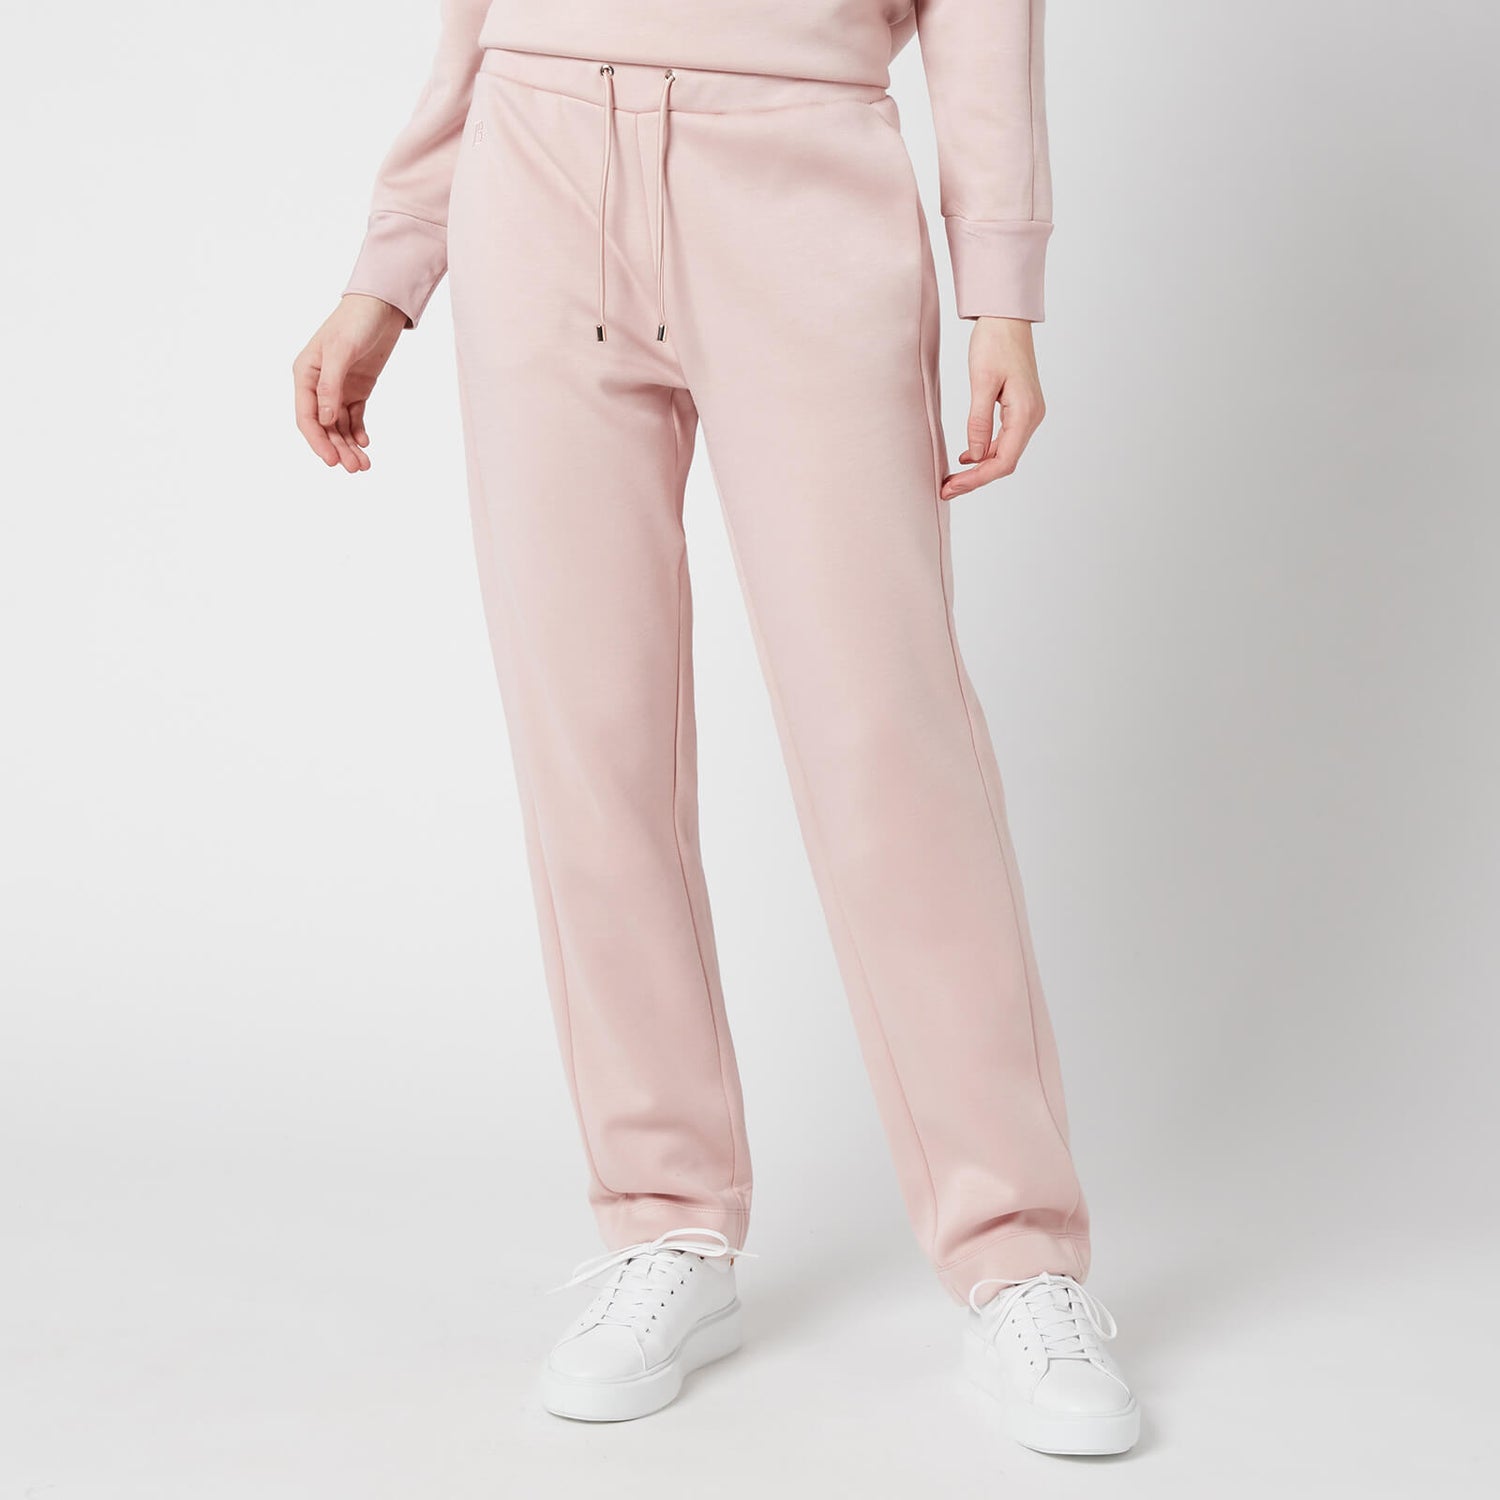 Ted Baker Women's Ginnih Satin Trim Jogger - Pale Pink